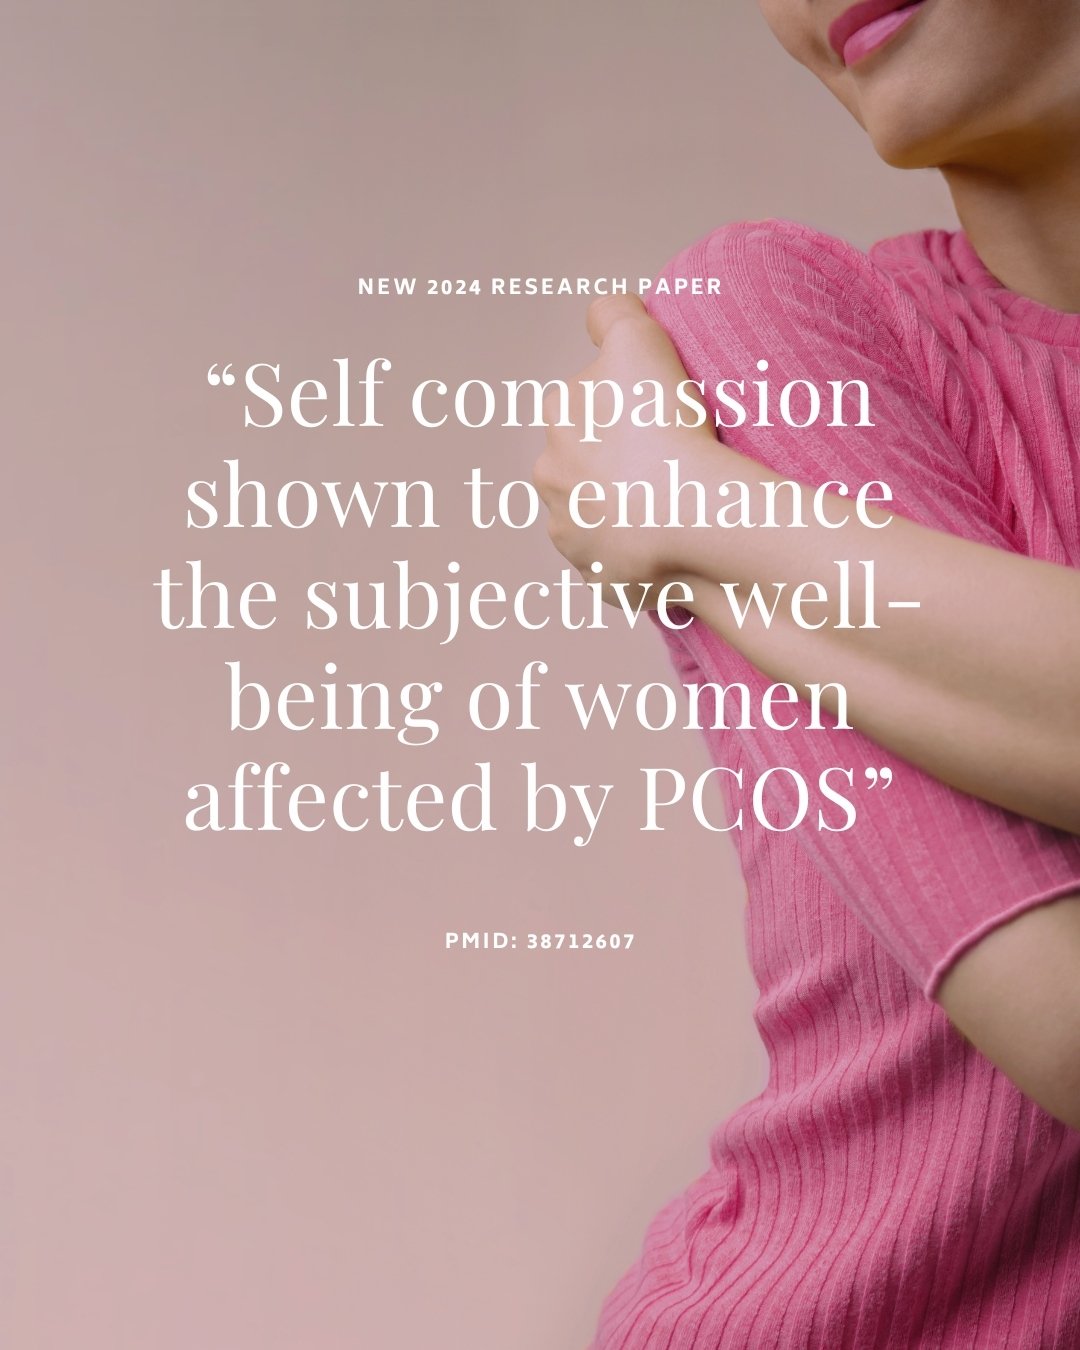 FRESH PCOS Research! Hot off the press.

This cross- sectional study was published this week looking into how regulatory emotional self-efficacy and self-compassion mediate anxiety, depression, body image distress and subjective well-being in women w